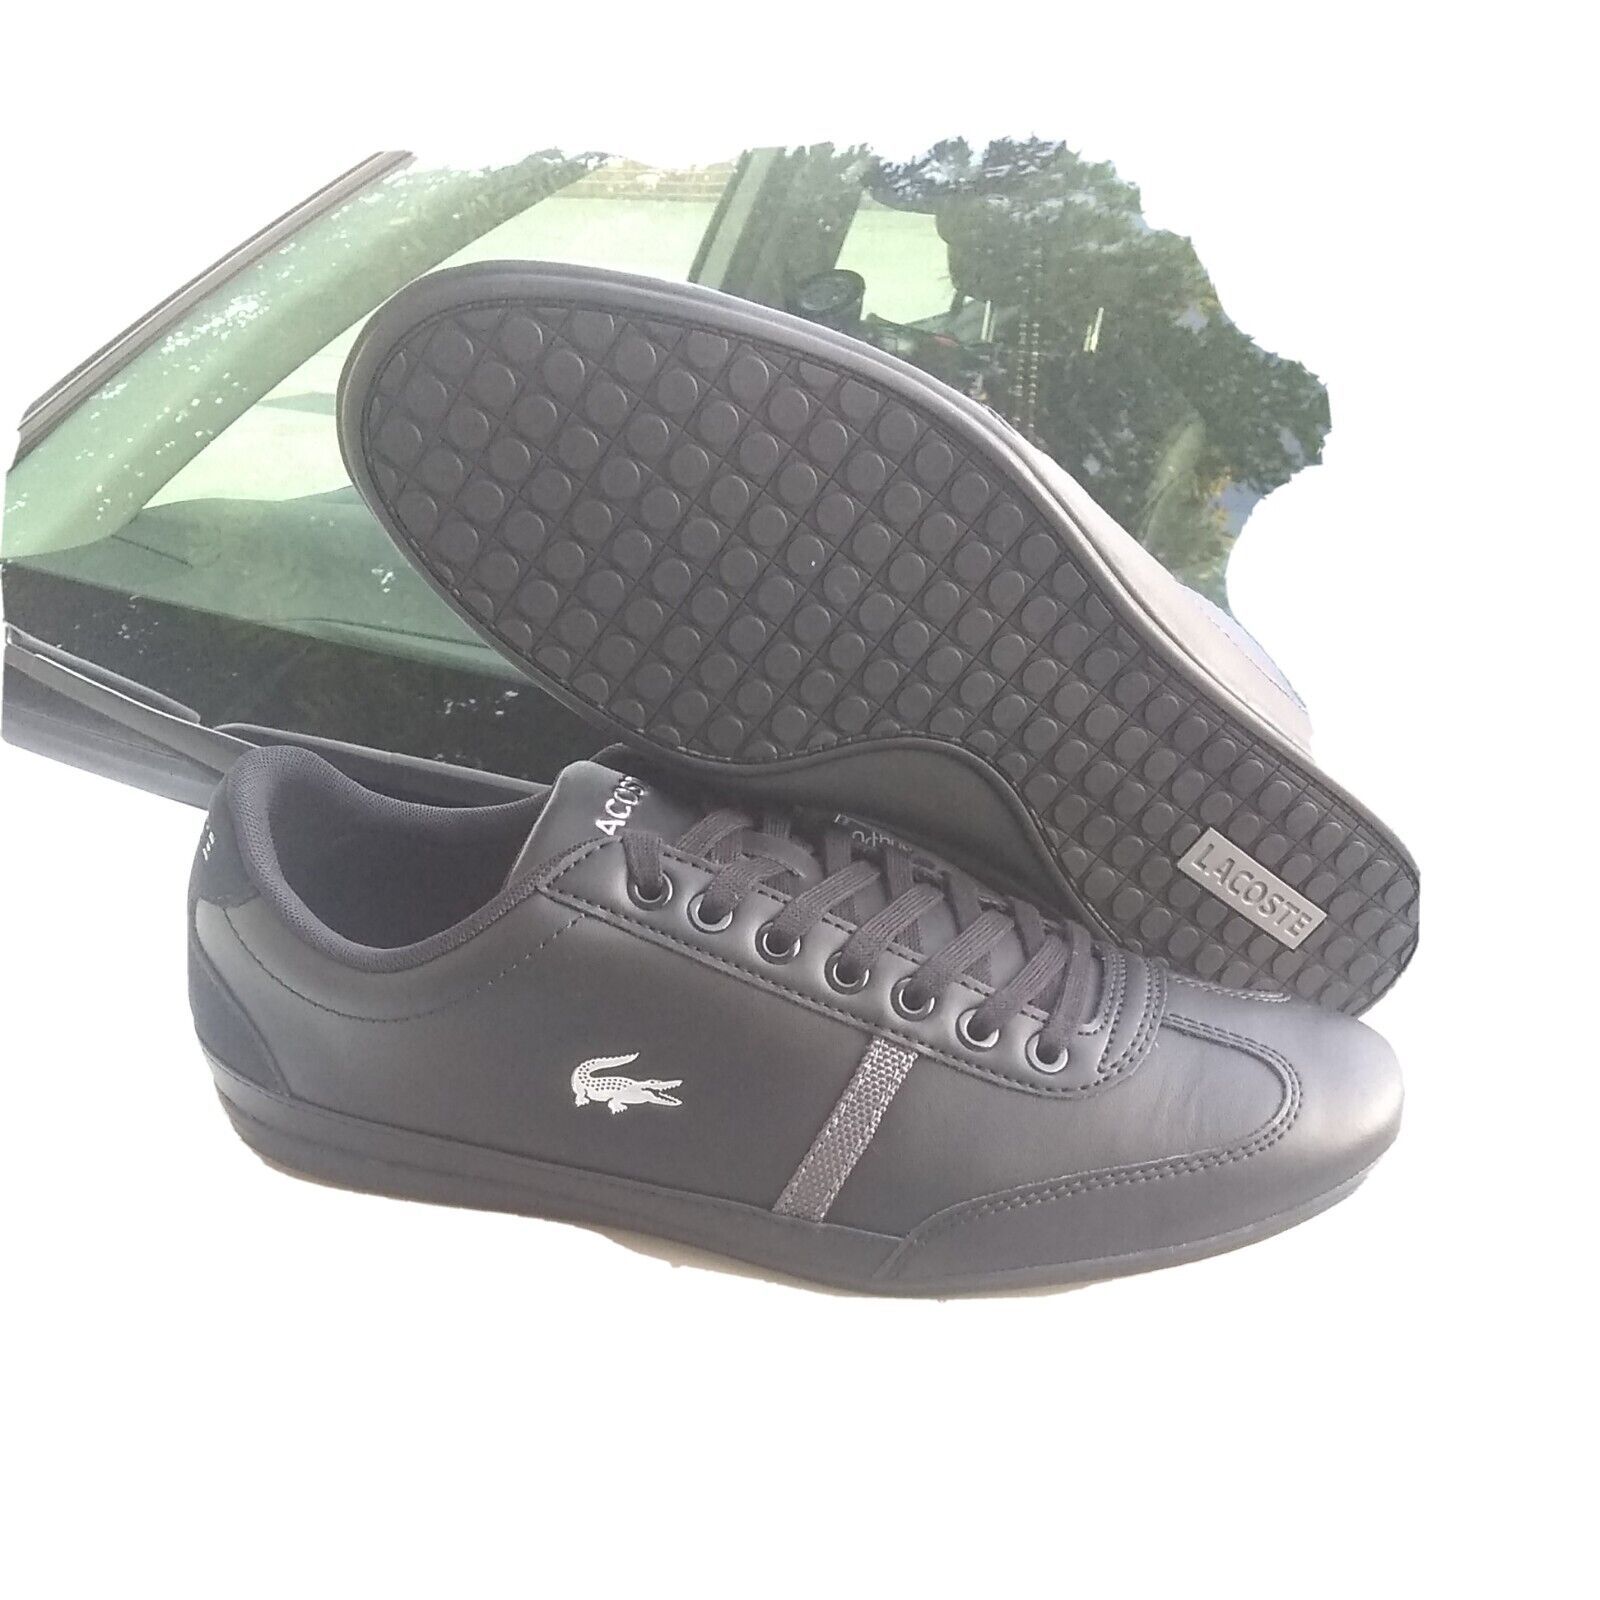 Primary image for Lacoste Chaussures Hommes 8.5 Misano sport 118 1 u cam Noir Gris